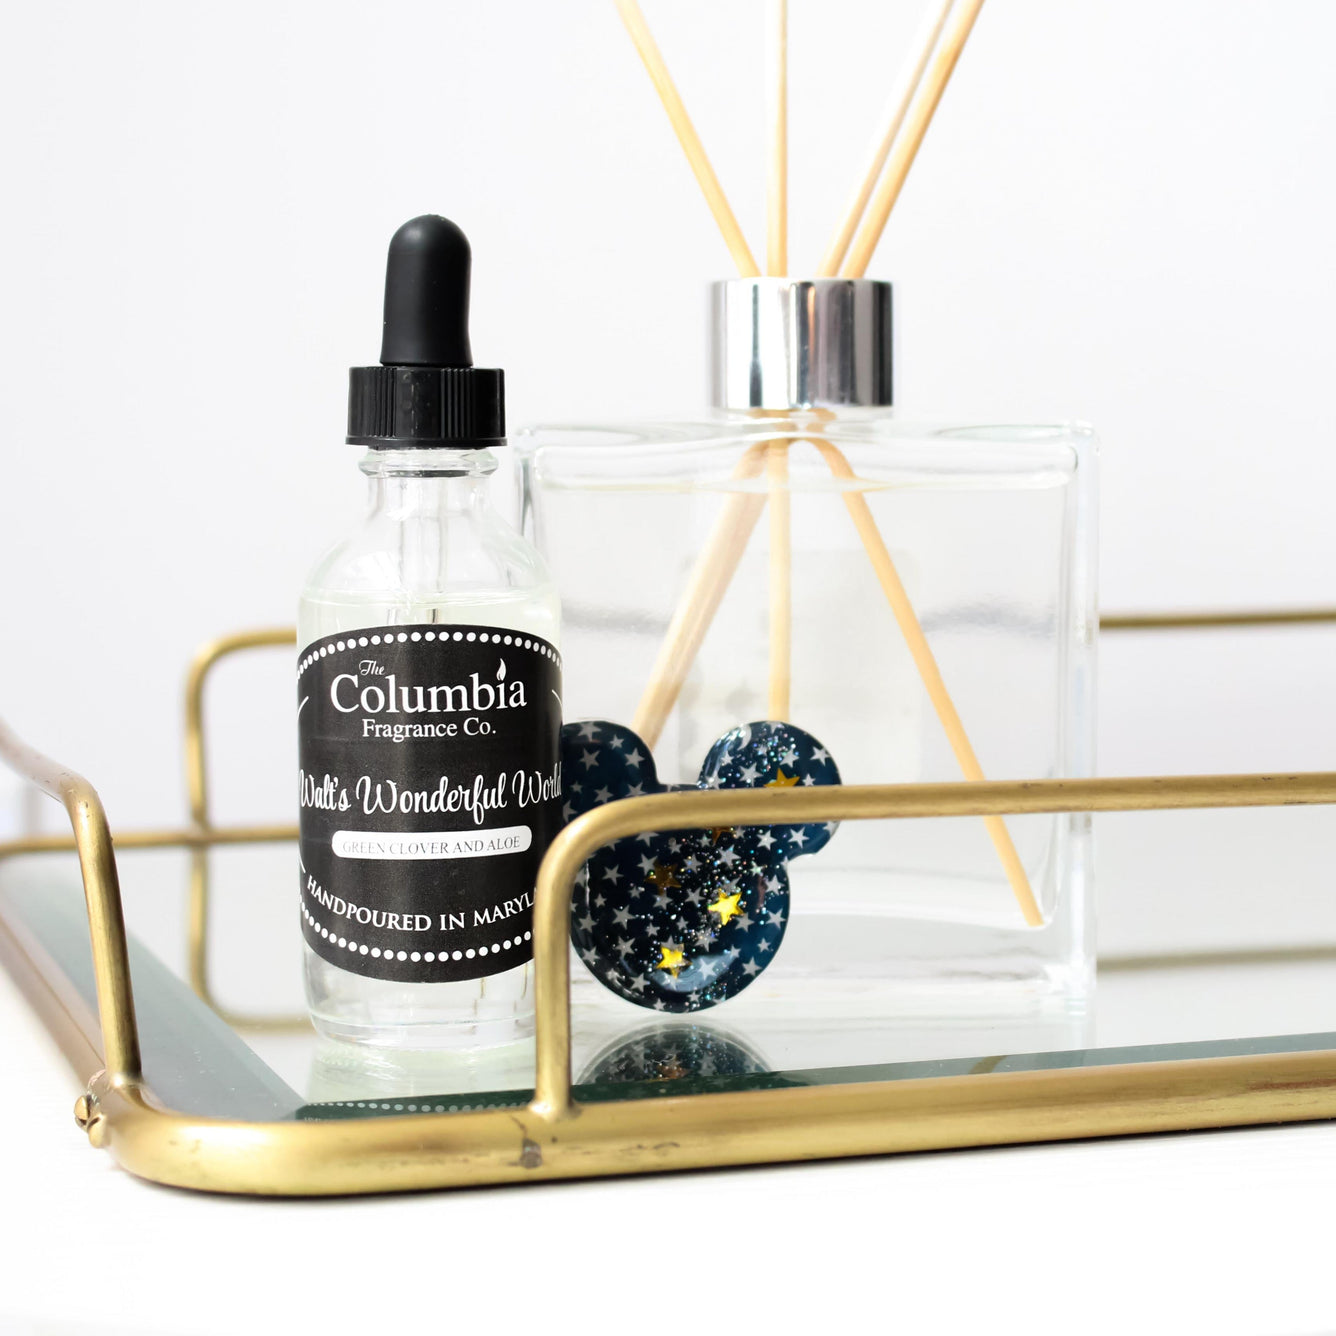 Hotel scent reed diffuser oil